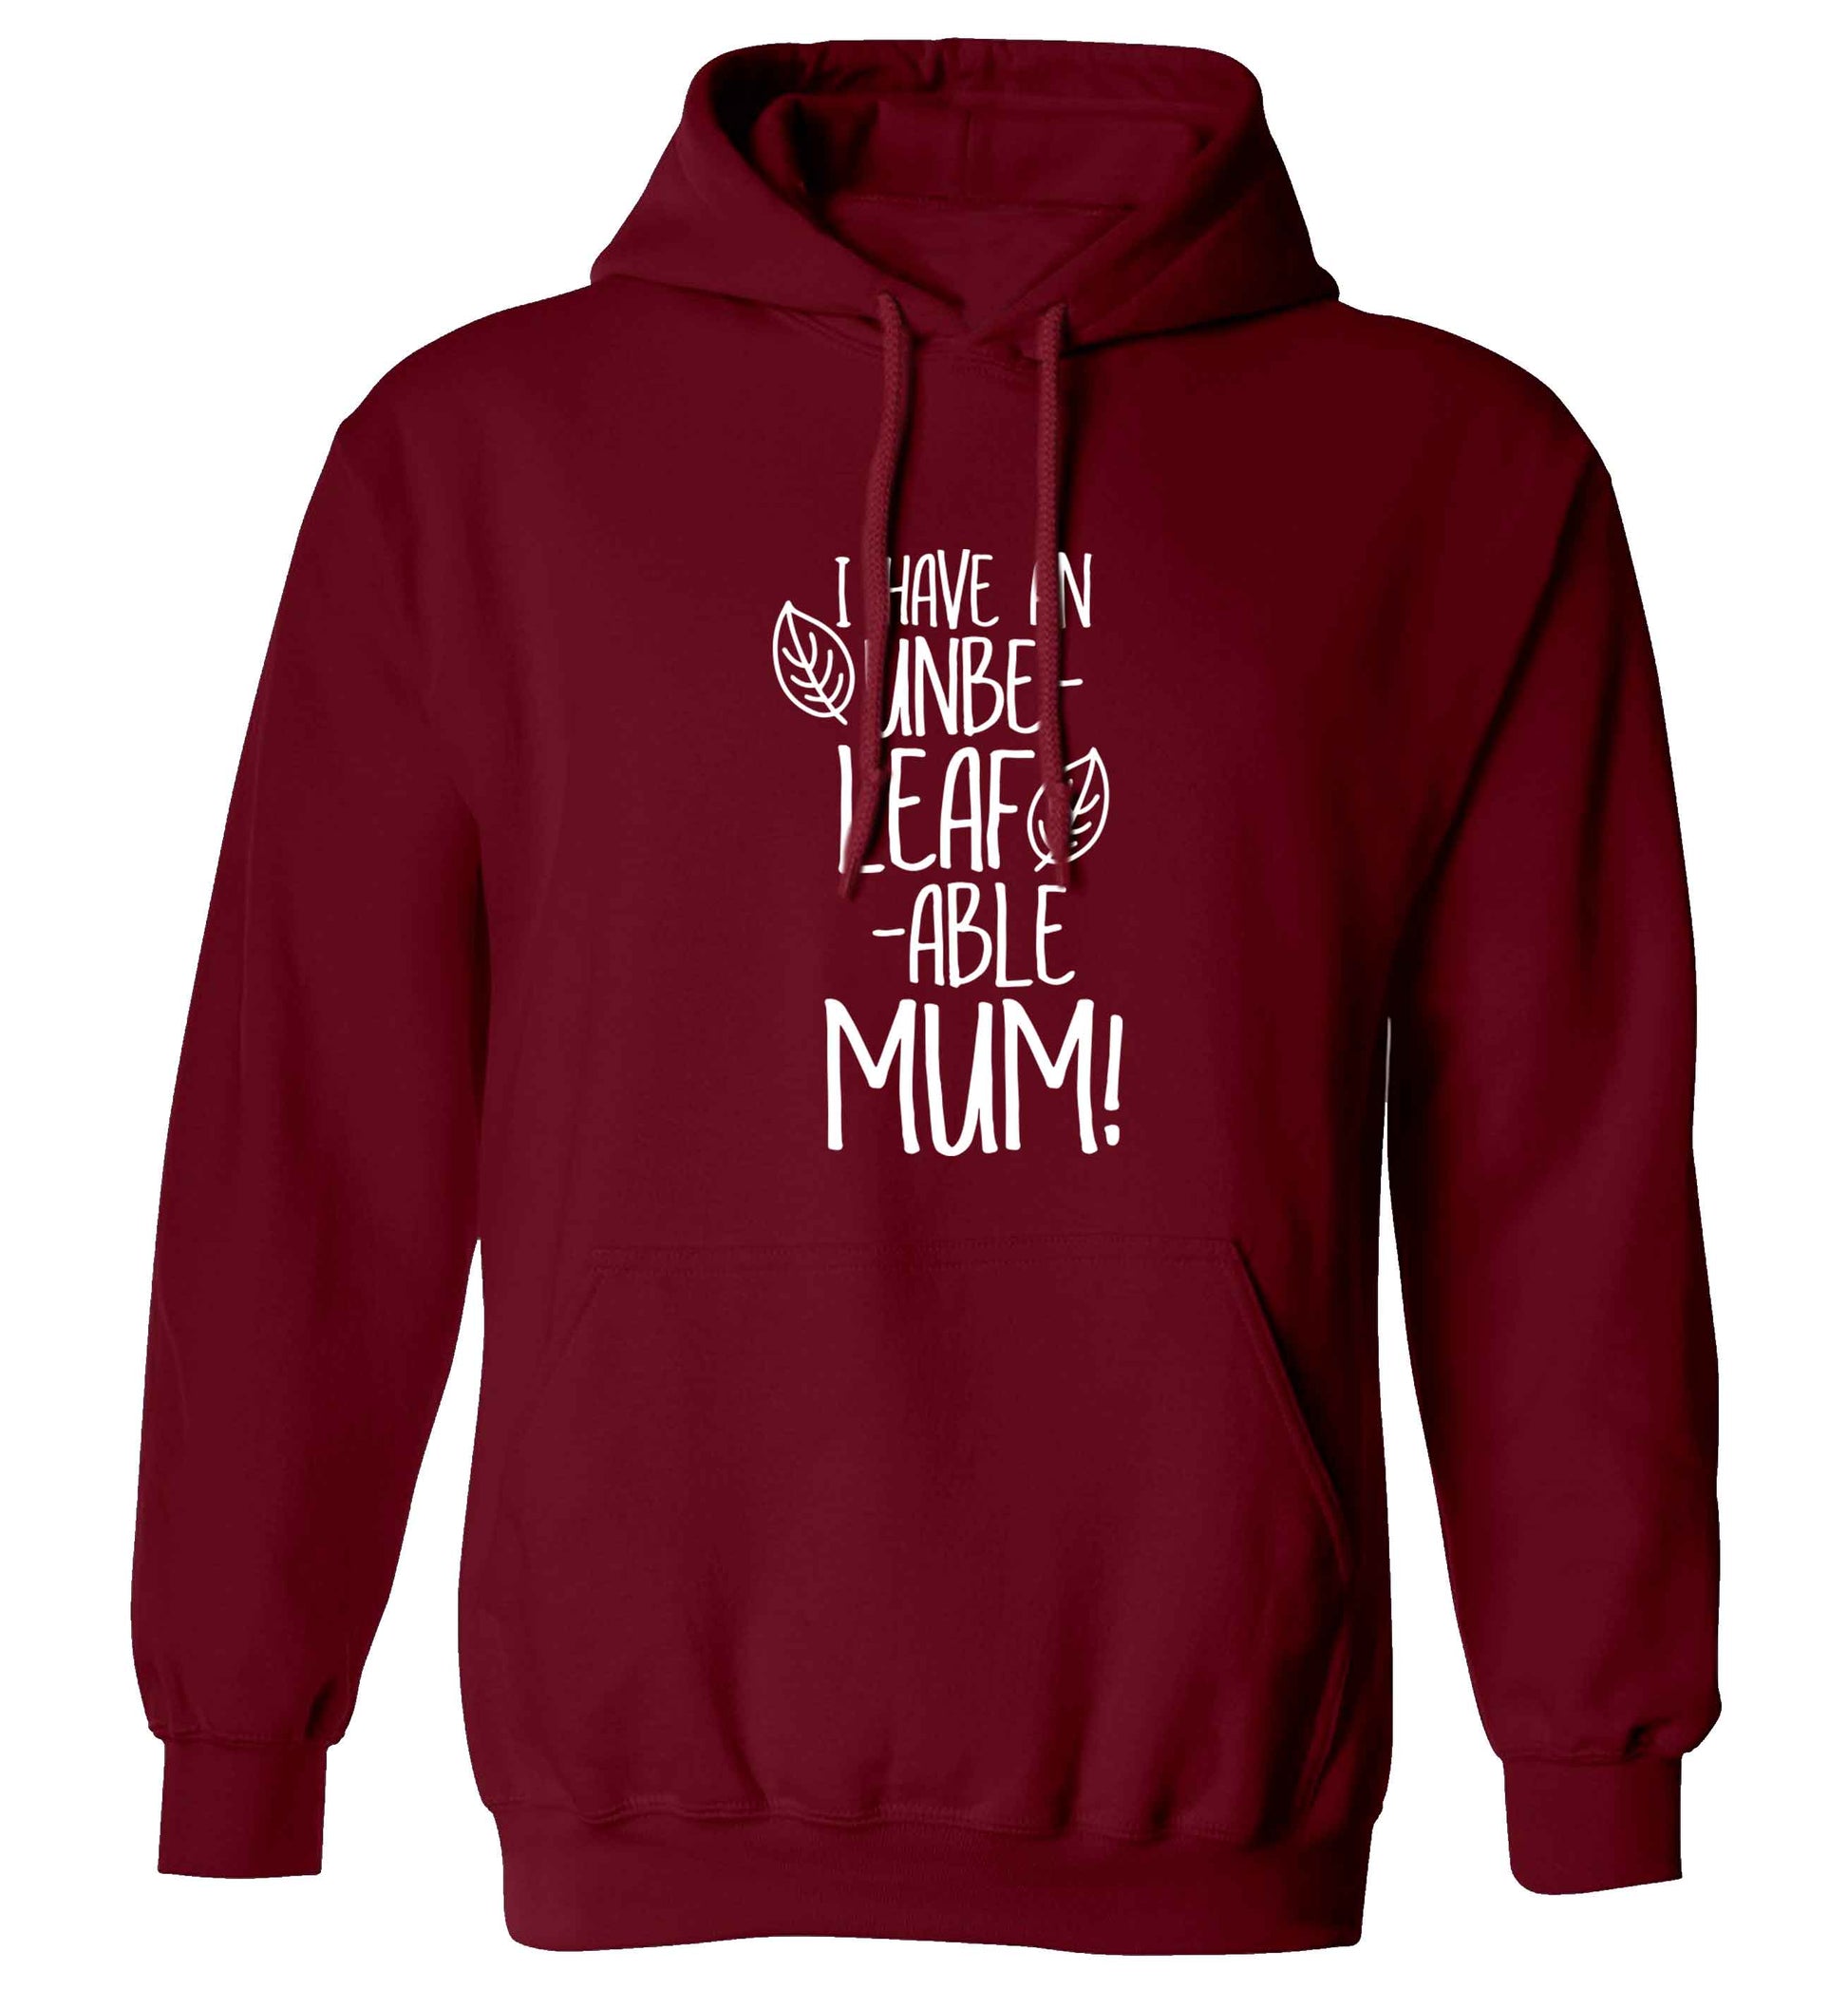 I have an unbeleafable mum! adults unisex maroon hoodie 2XL